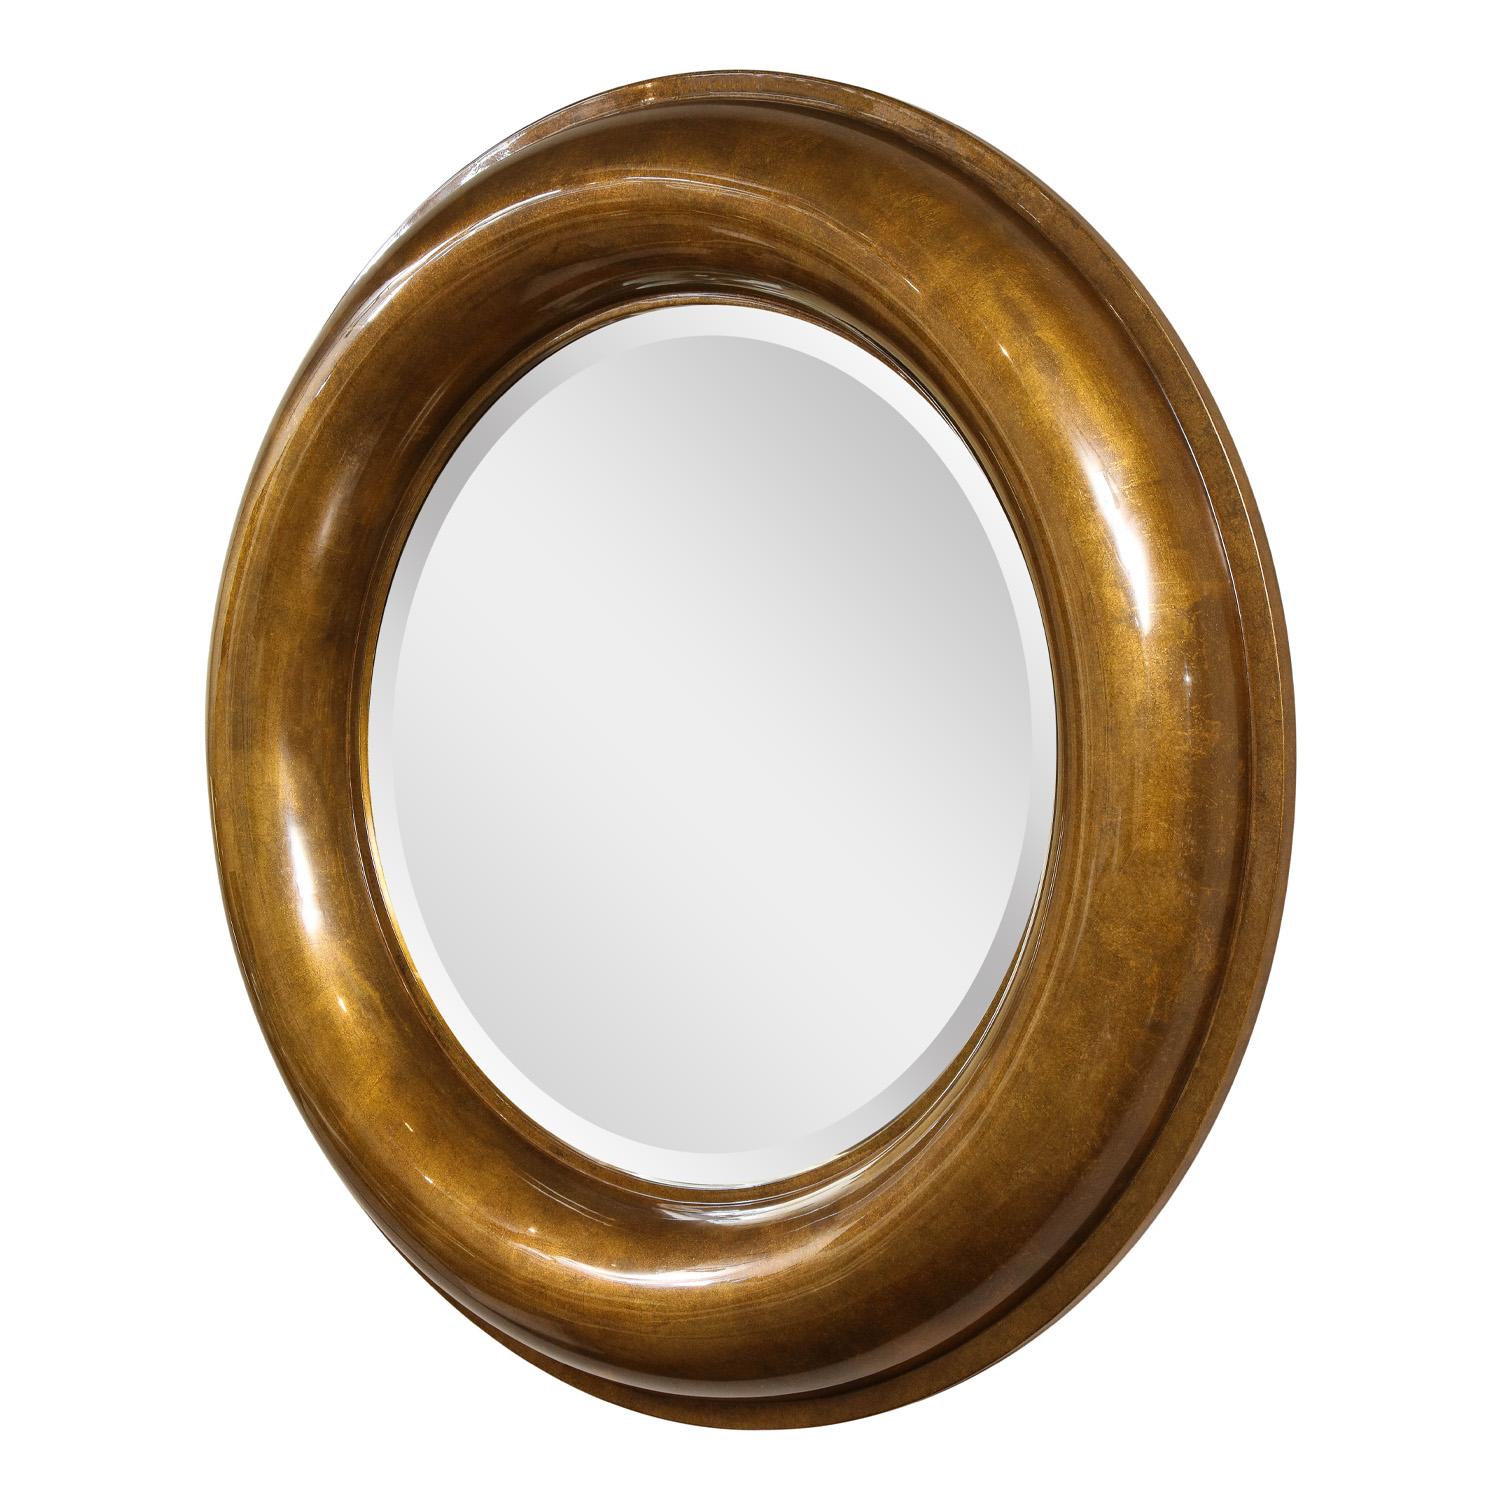 Monumental and superb large “half round molding mirror with step down detail